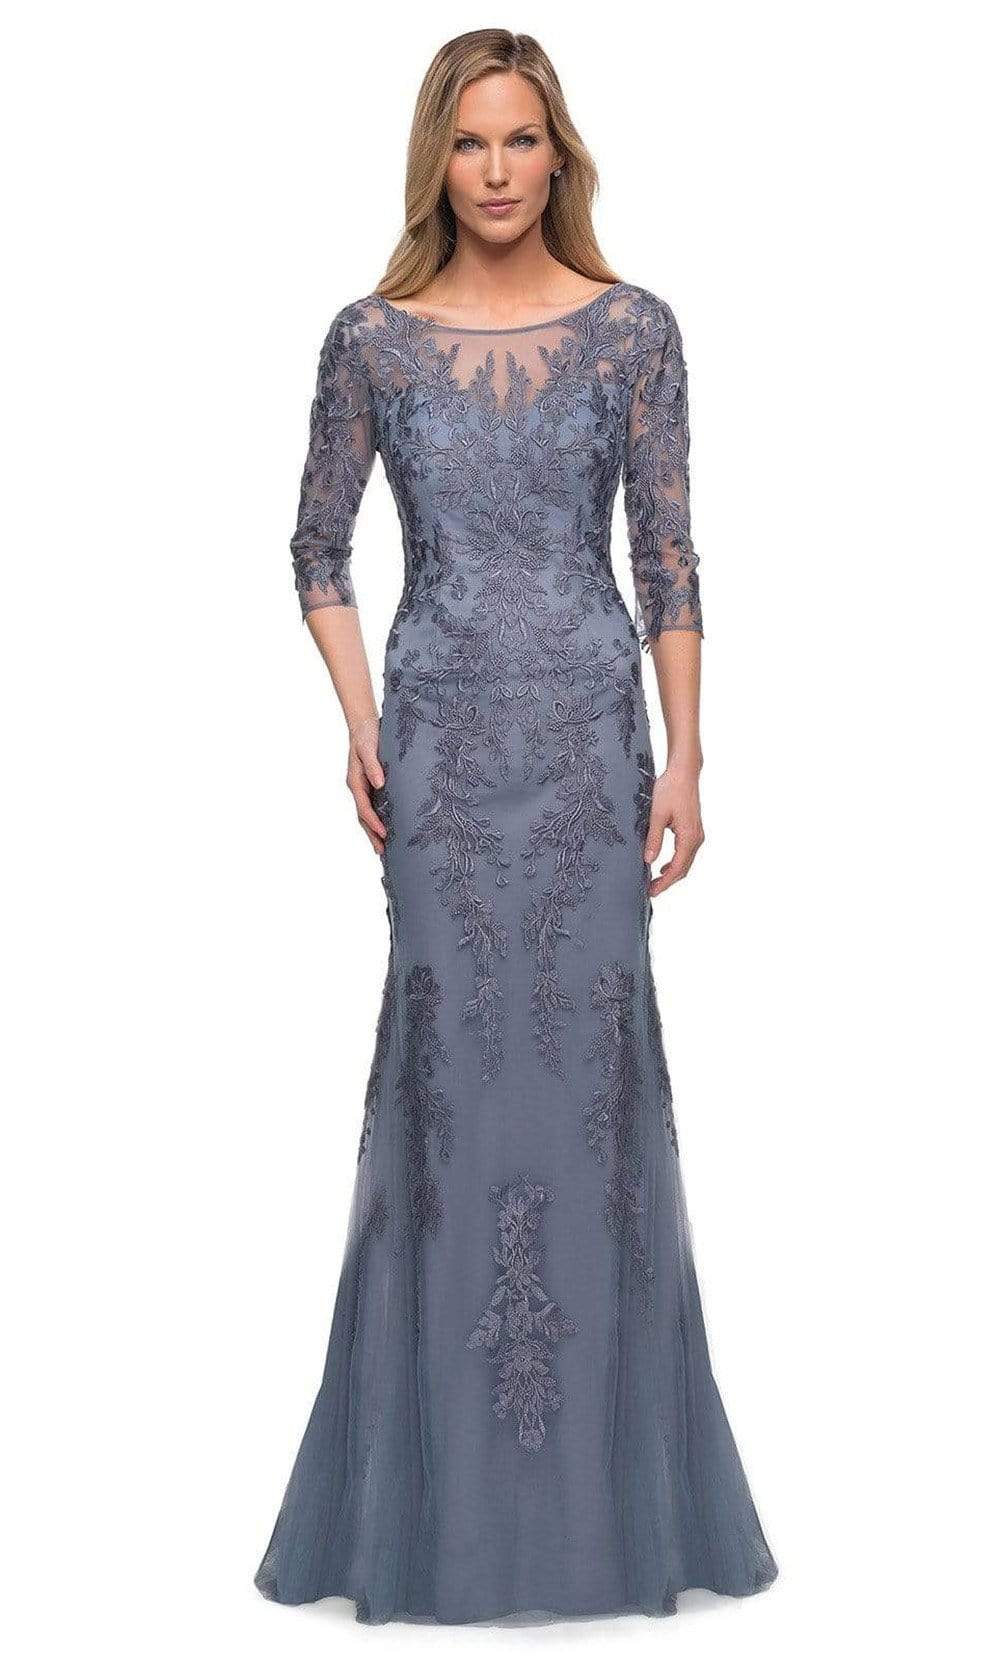 La Femme 29226 Embroidered Tulle Sheath Gown - 12